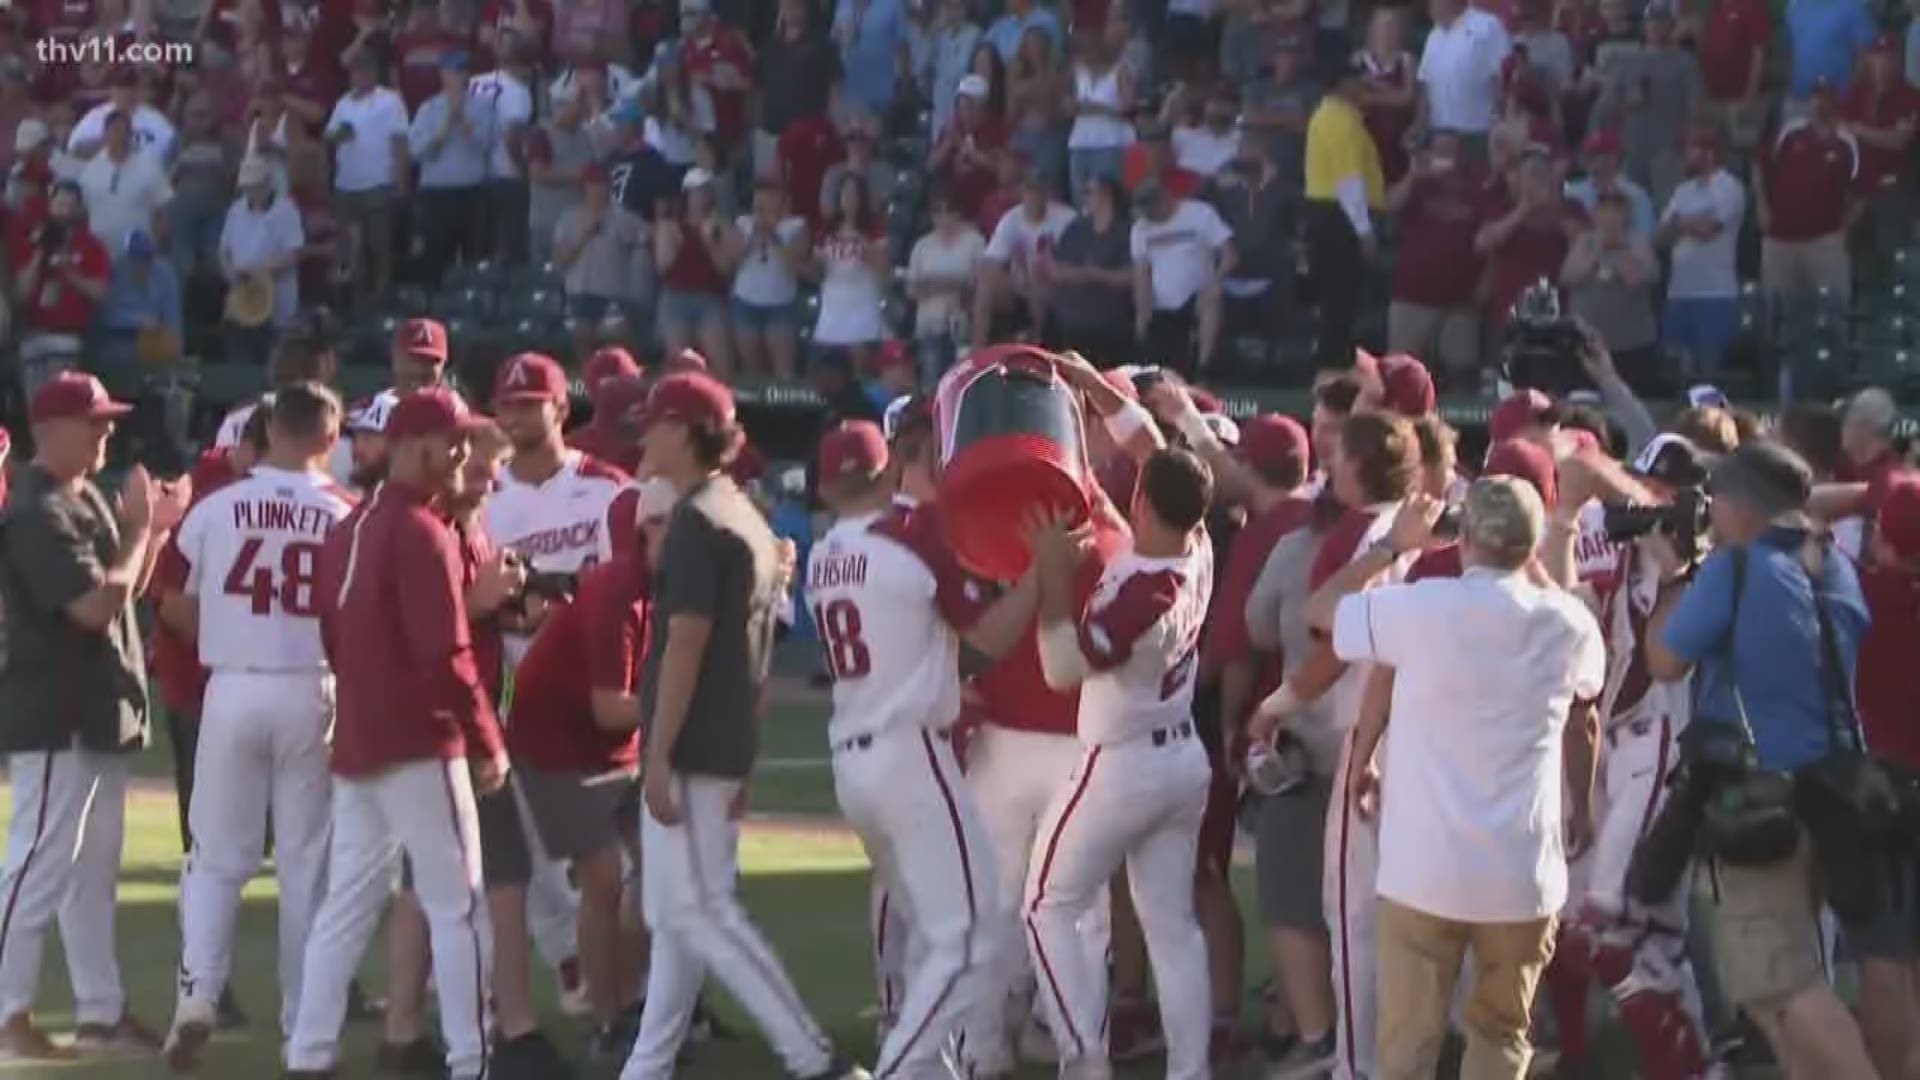 In just 36 hours - the Diamond Hogs will return to TD Ameritrade Park in Omaha for the second year in a row.